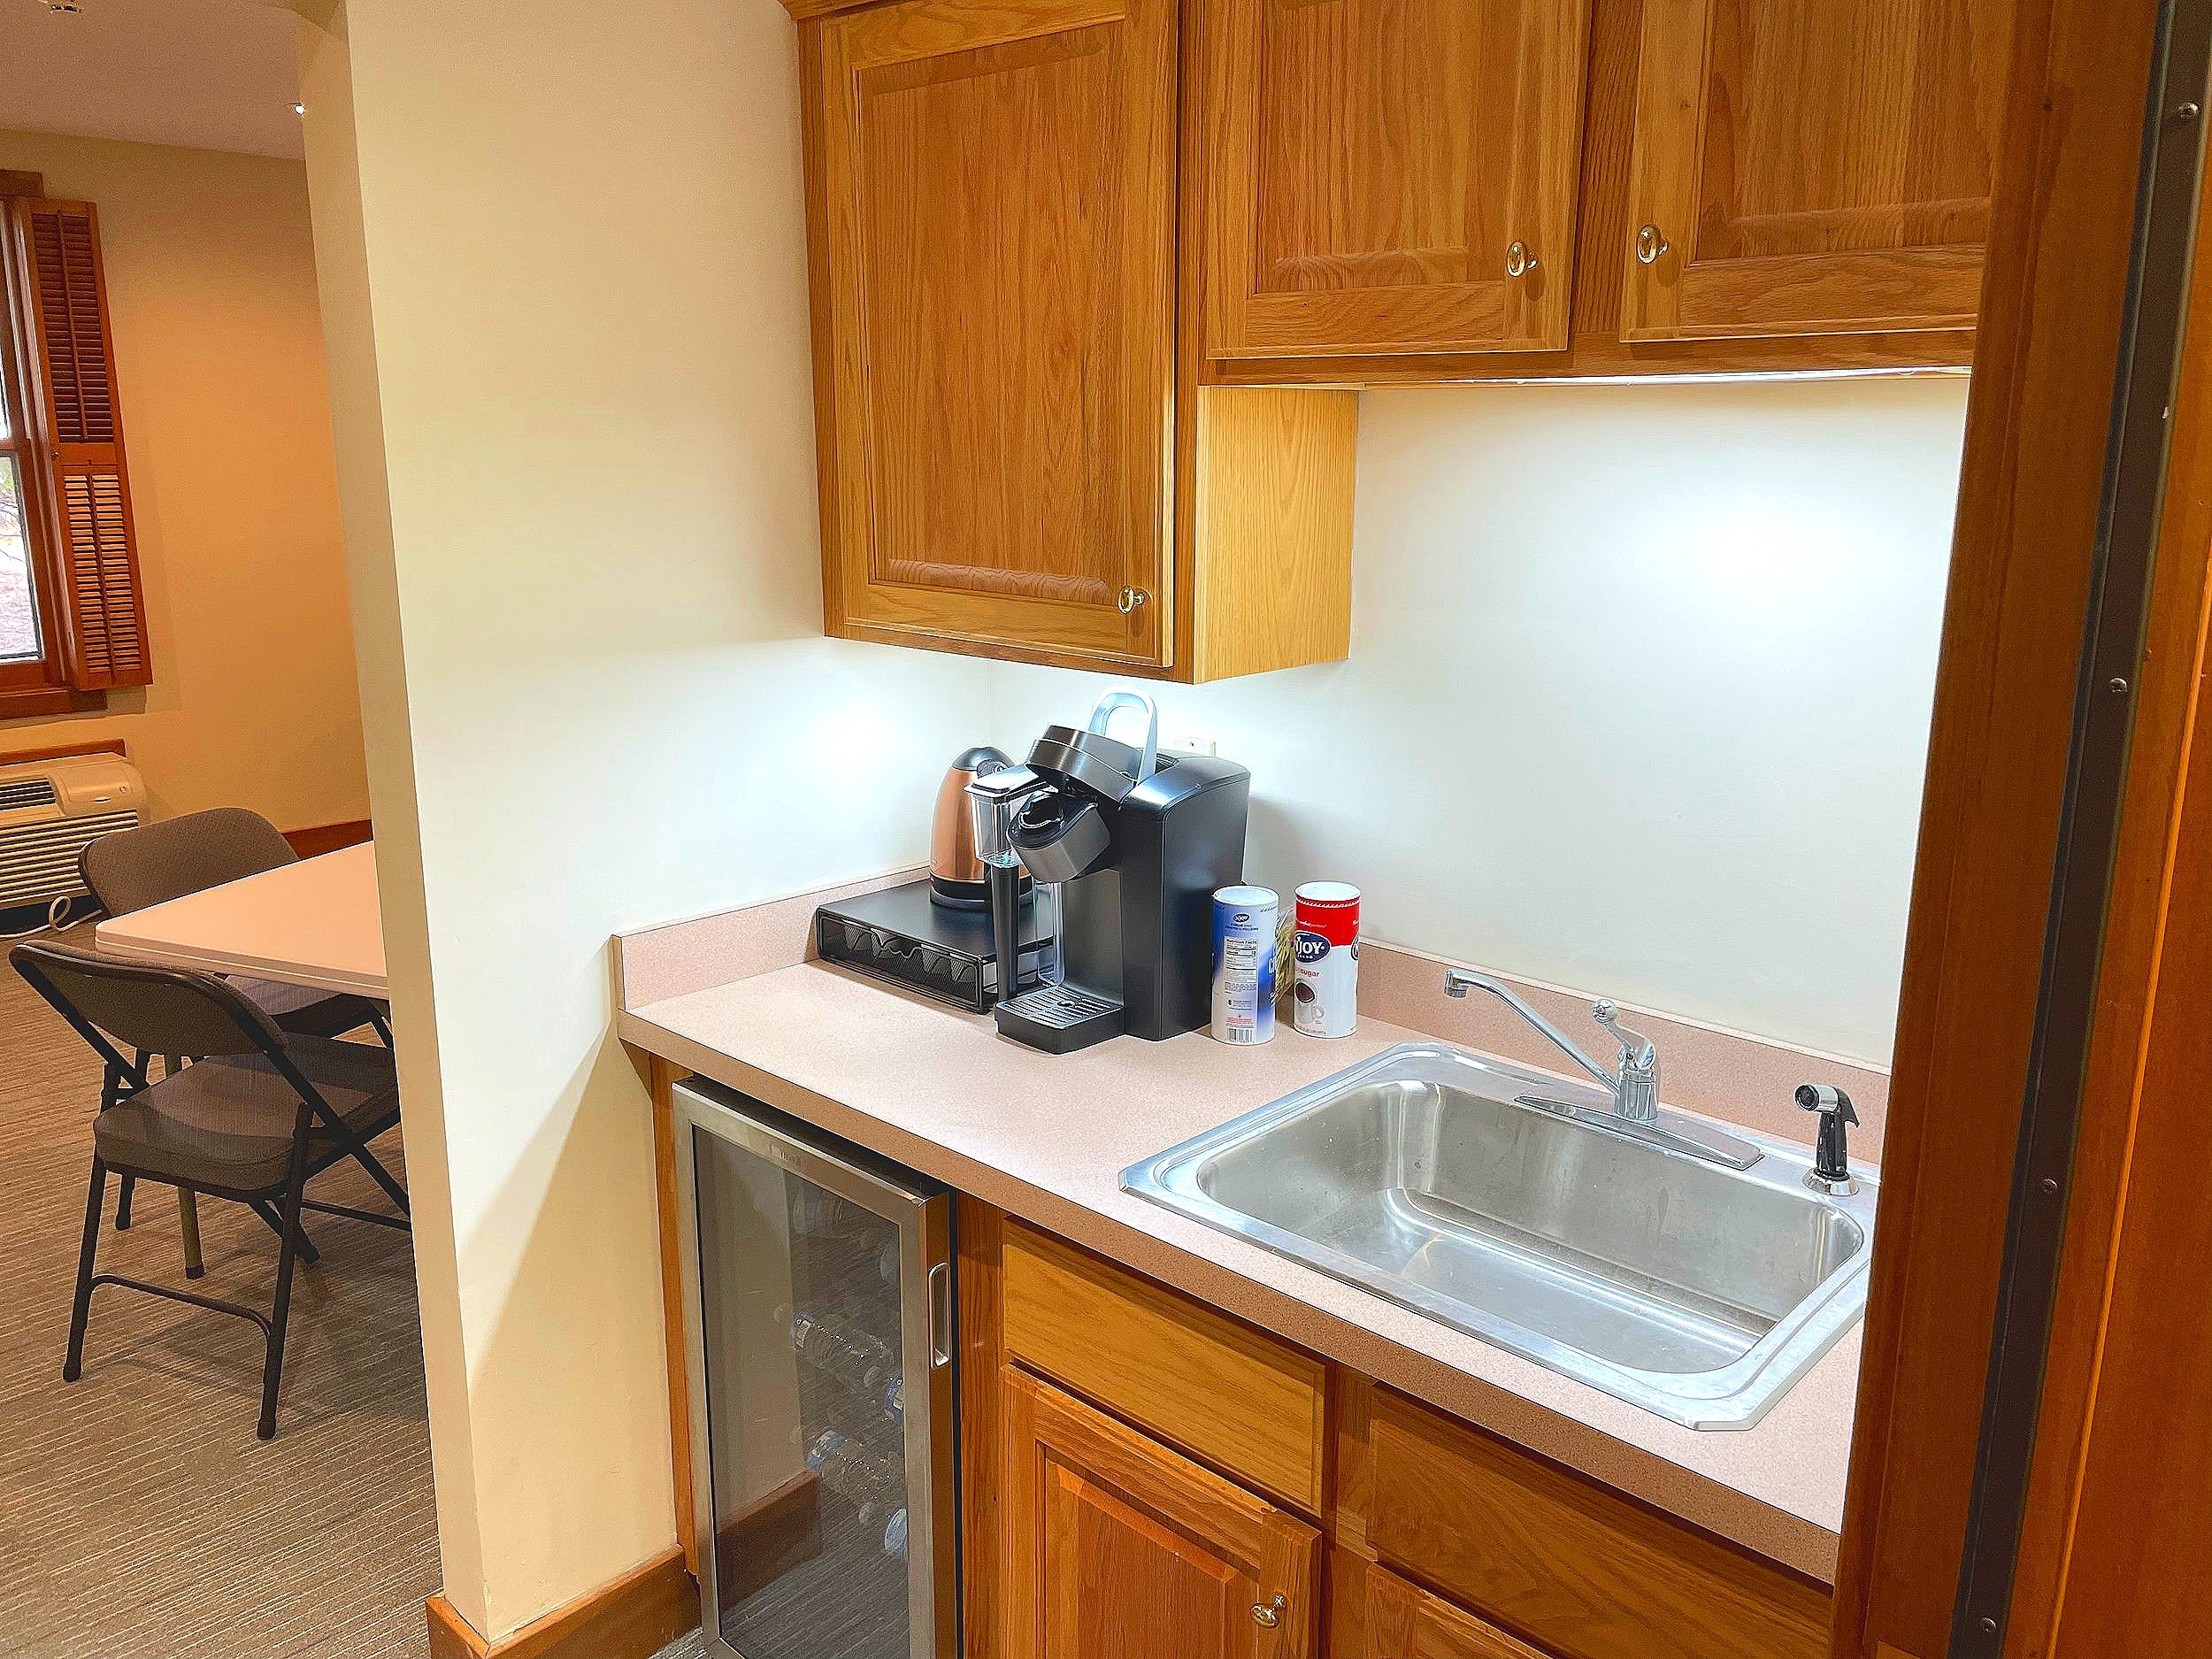   The room’s kitchenette has a small refrigerator, sink, and coffee maker. There is a large space for coats opposite the kitchen counter.  